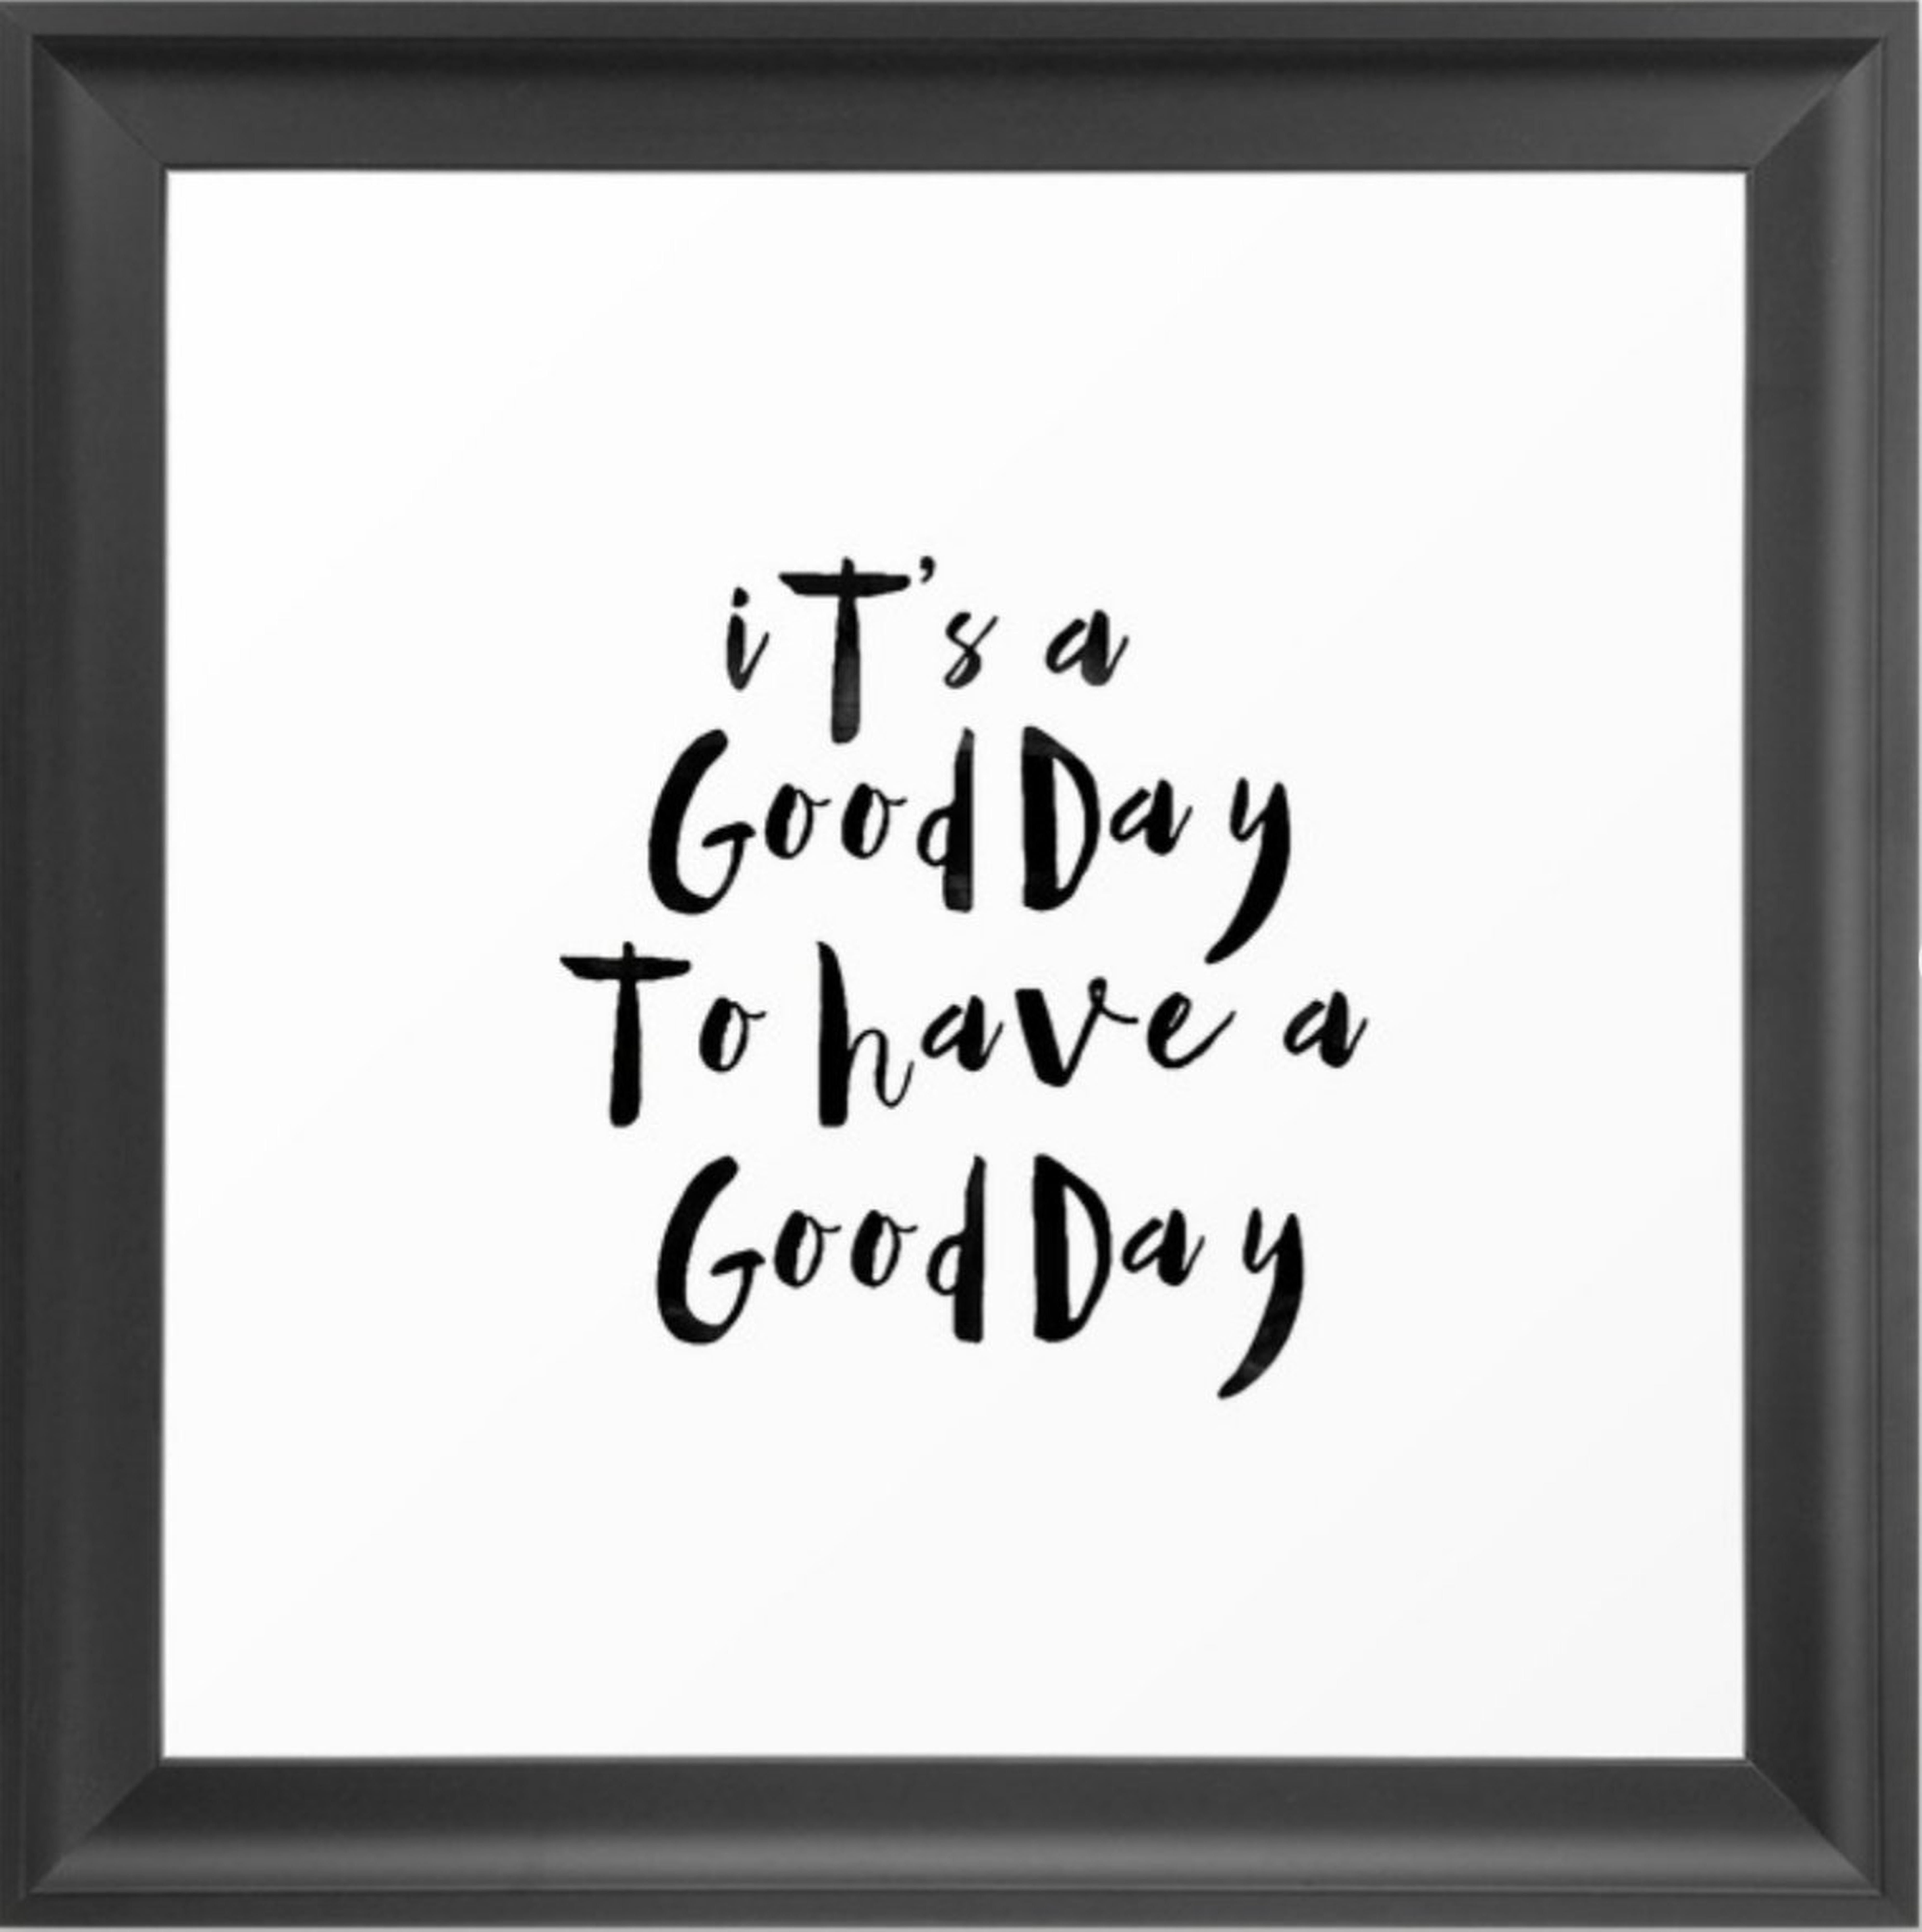 It's a good day to have a good day Framed Art Print - Society6